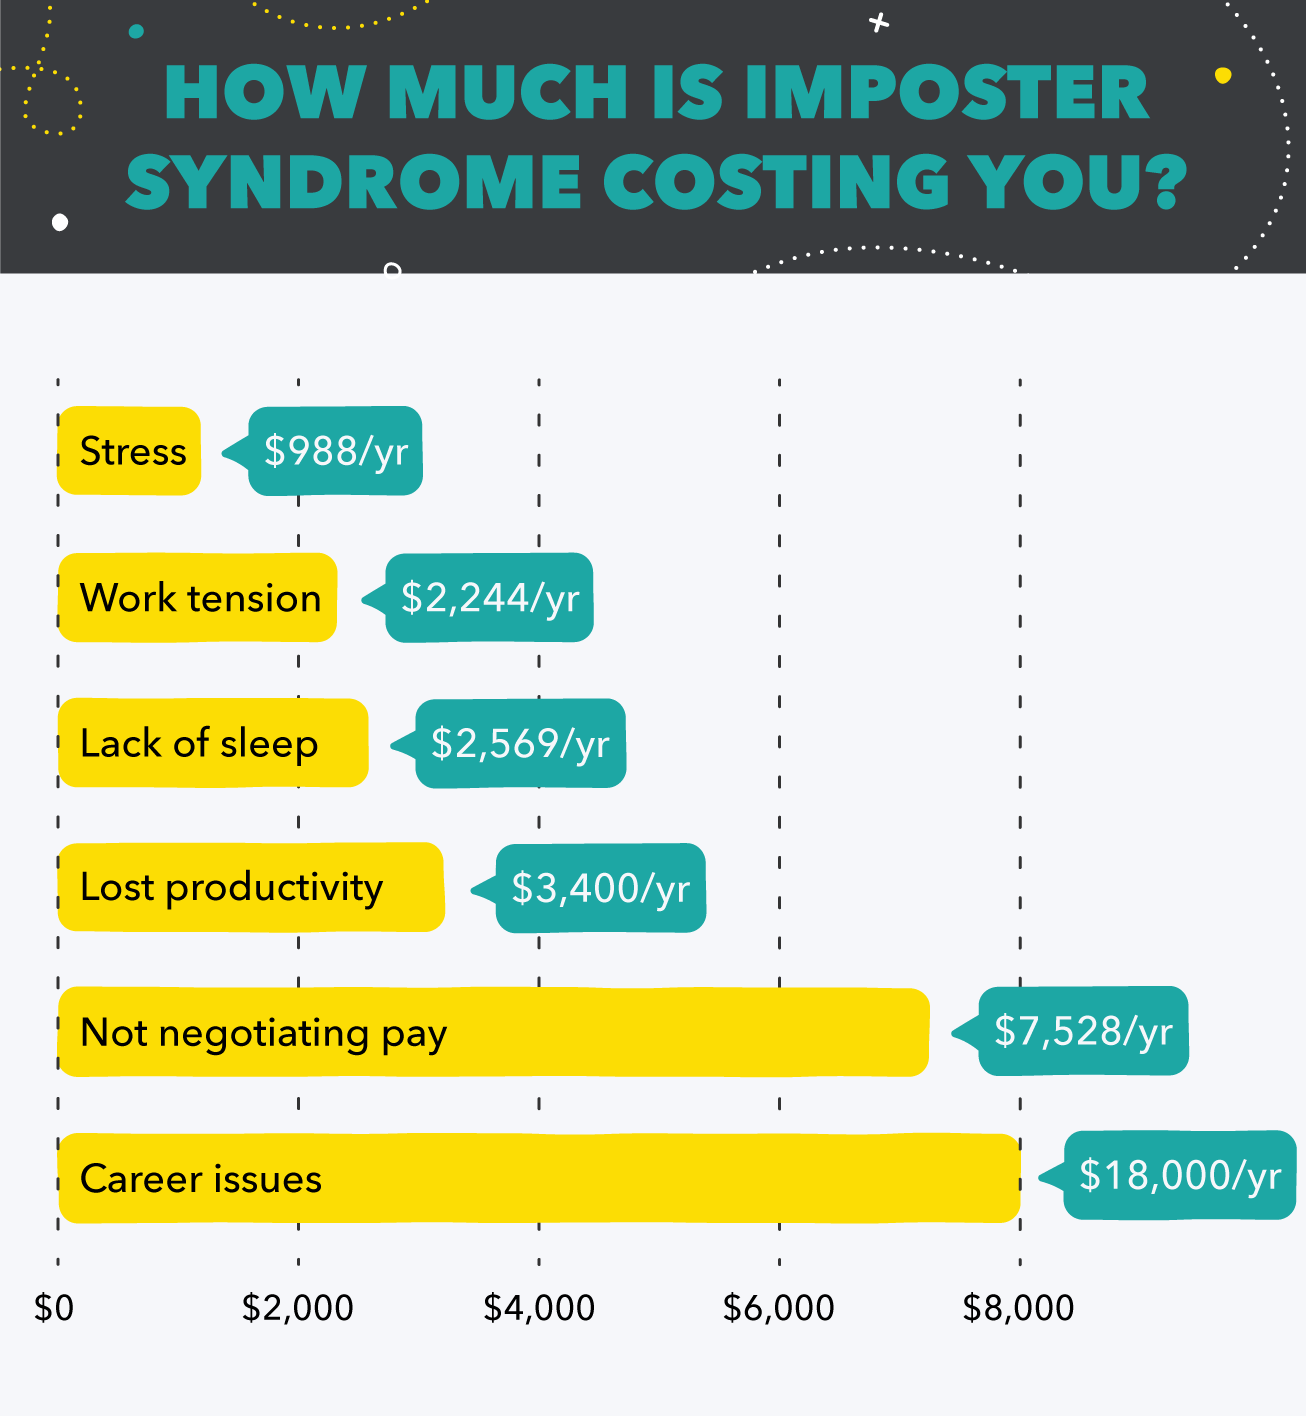 How mush is imposter syndrome costing you?